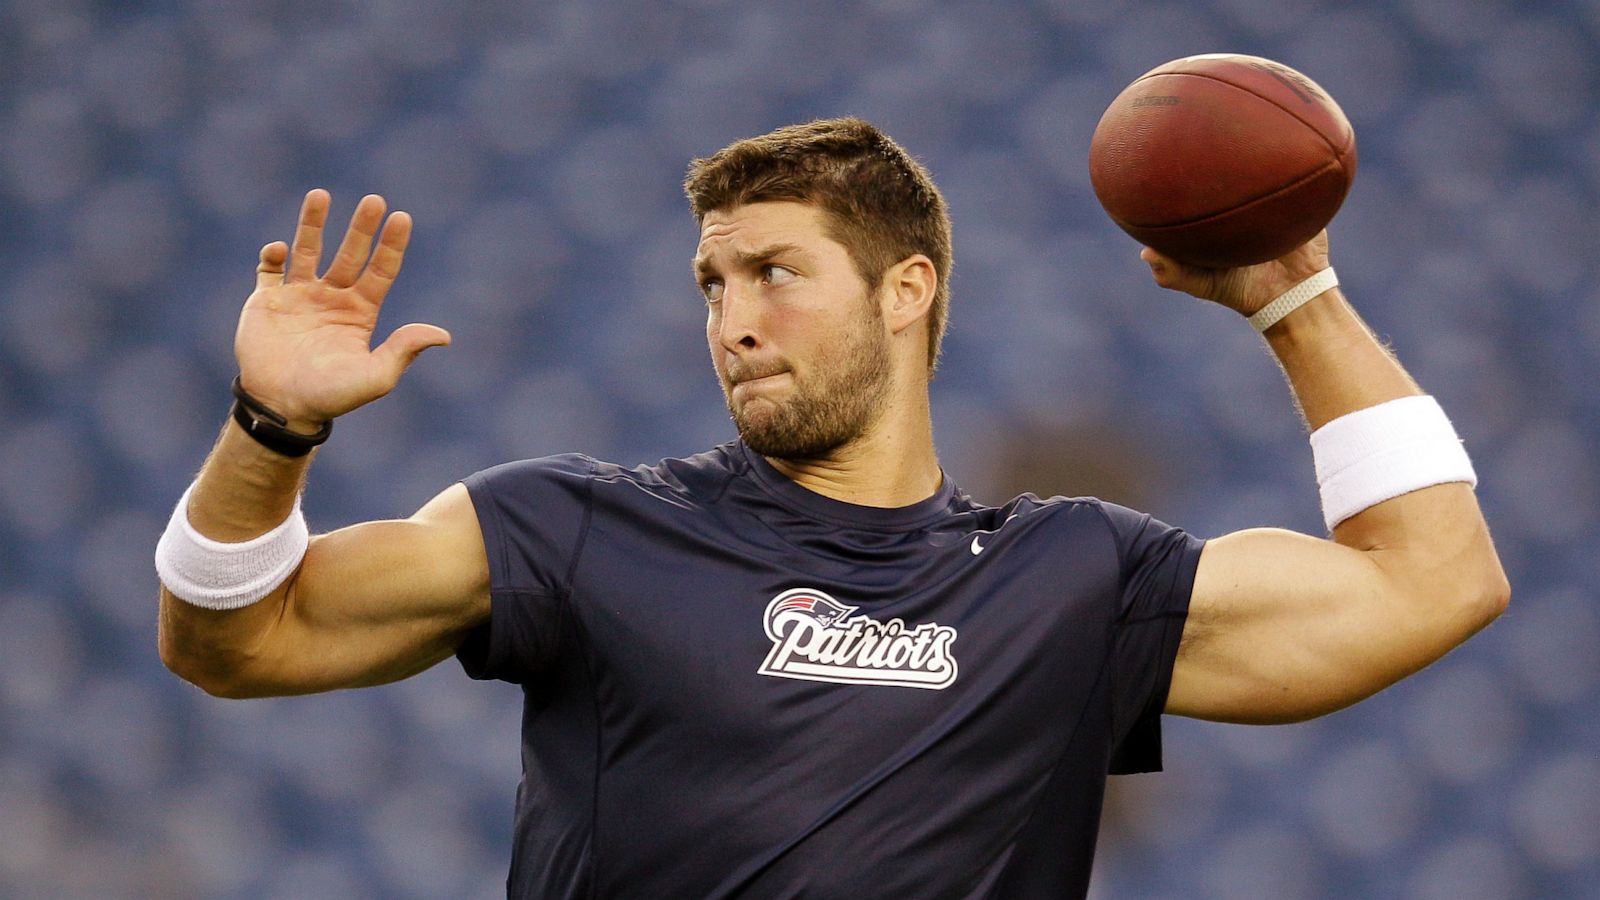 ESPN reports Tebow cut by Patriots